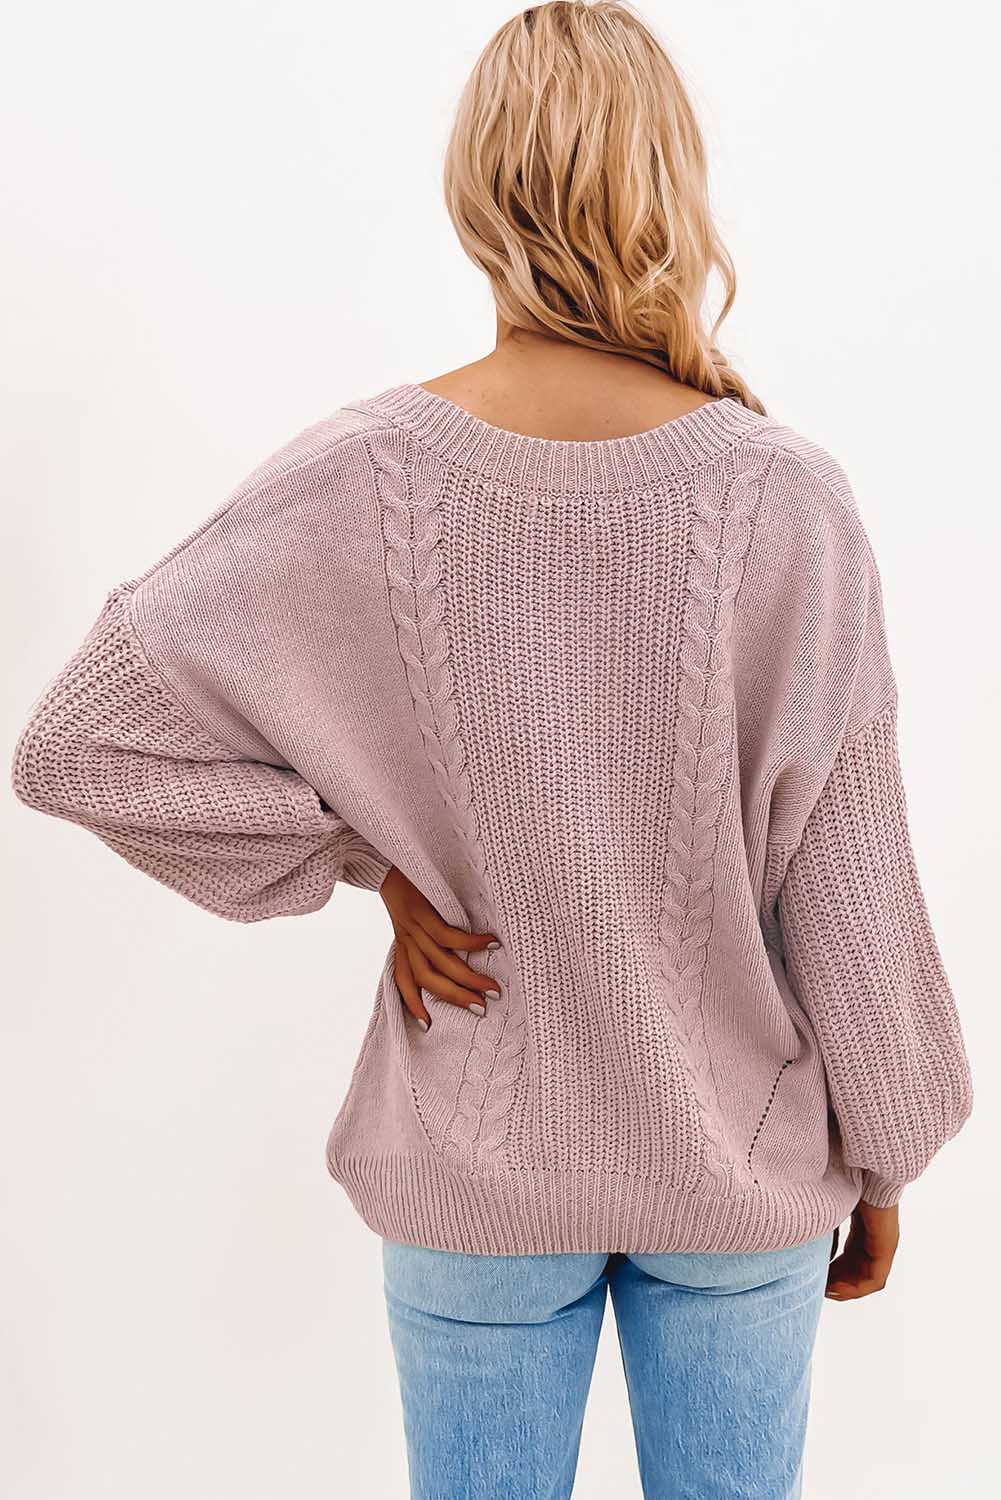 Pink V-Neck Long Sleeve Cable Knit Sweater Pre Order Sweaters & Cardigans JT's Designer Fashion